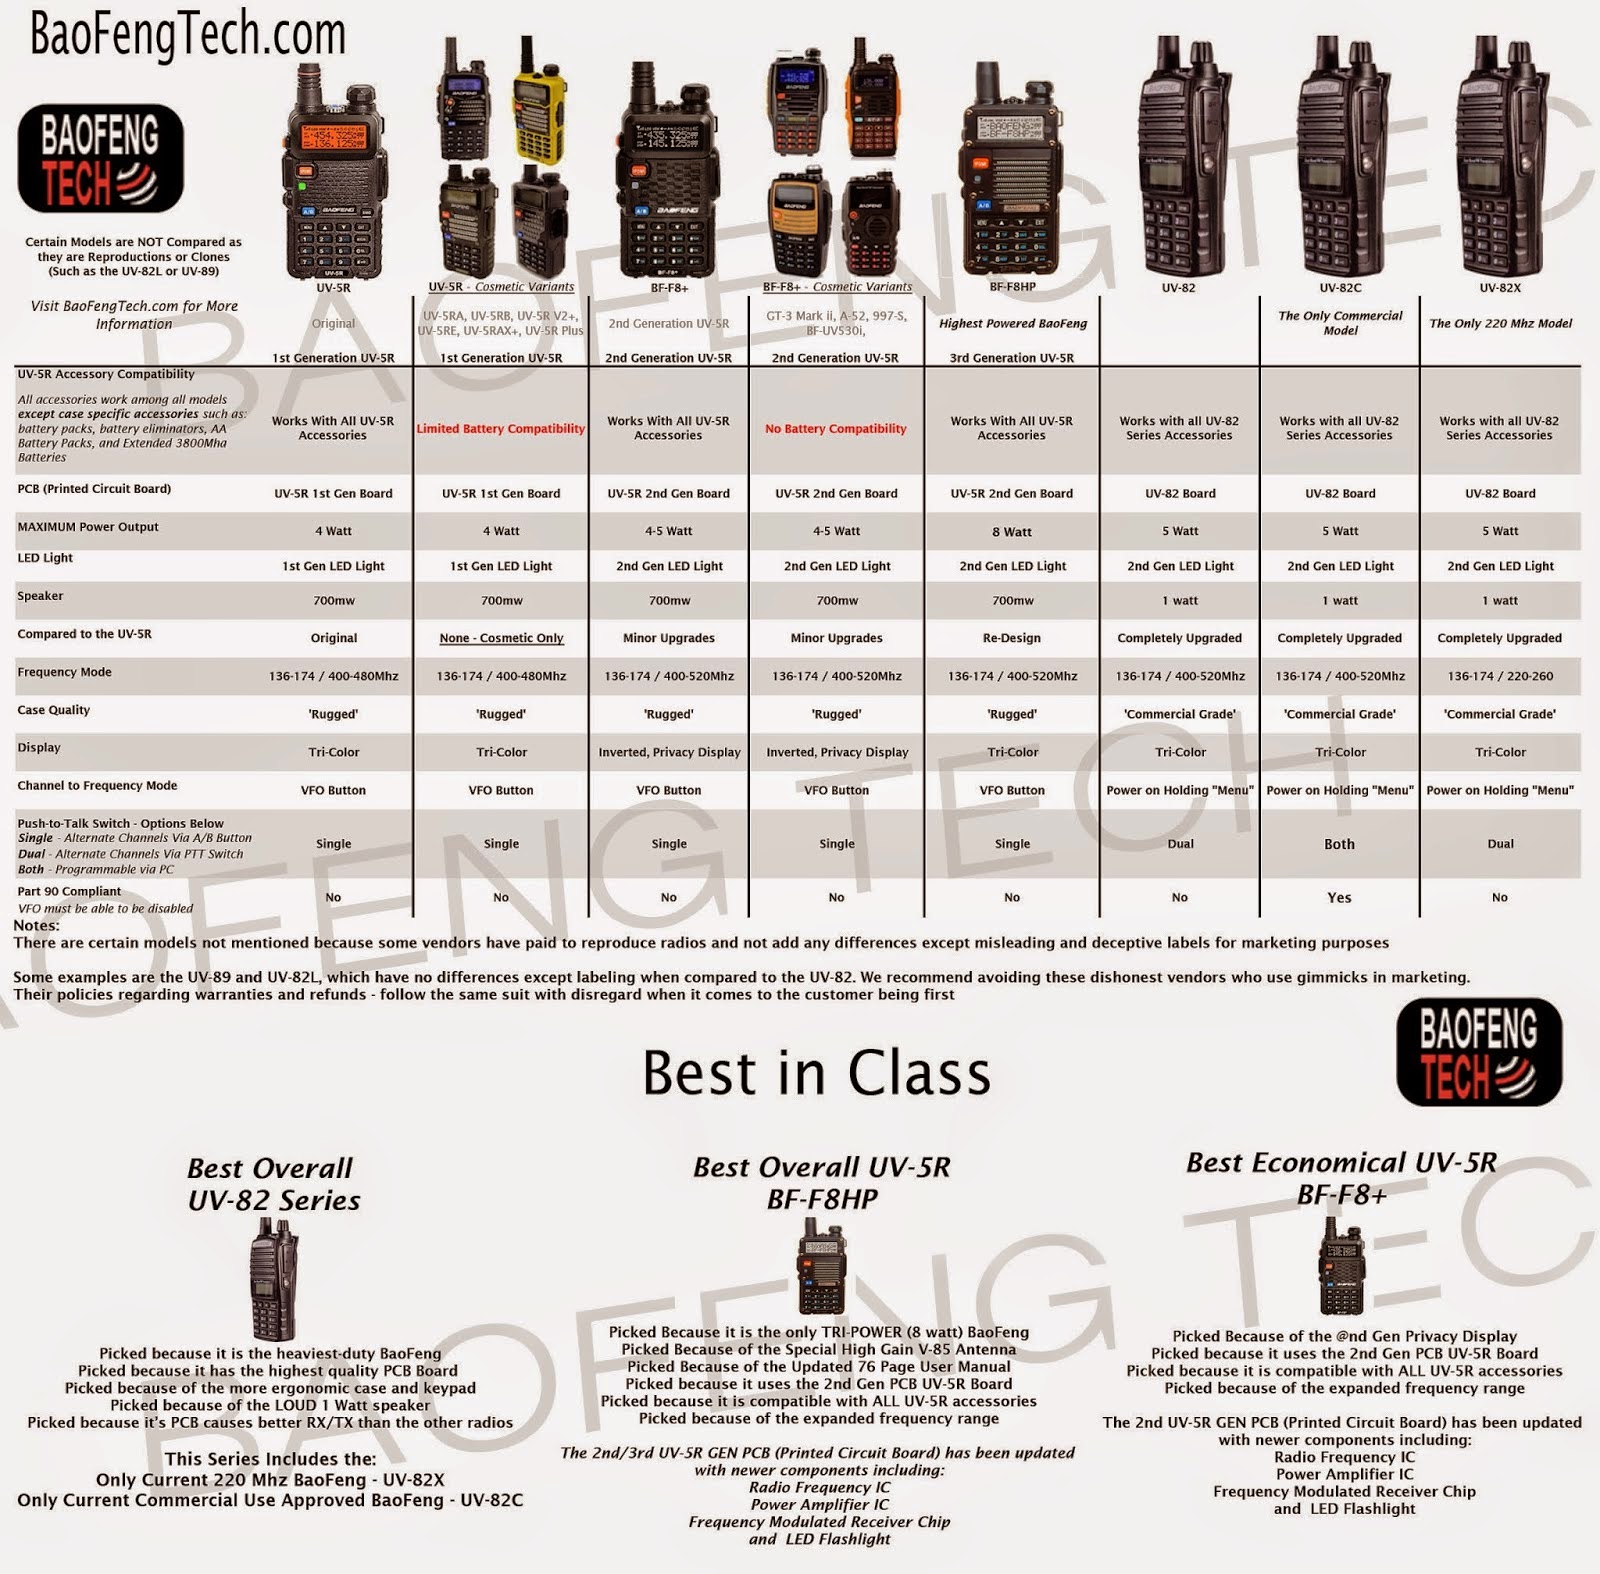 Baofeng UV-5R radio and accessories: Official Baofeng Comparison Chart